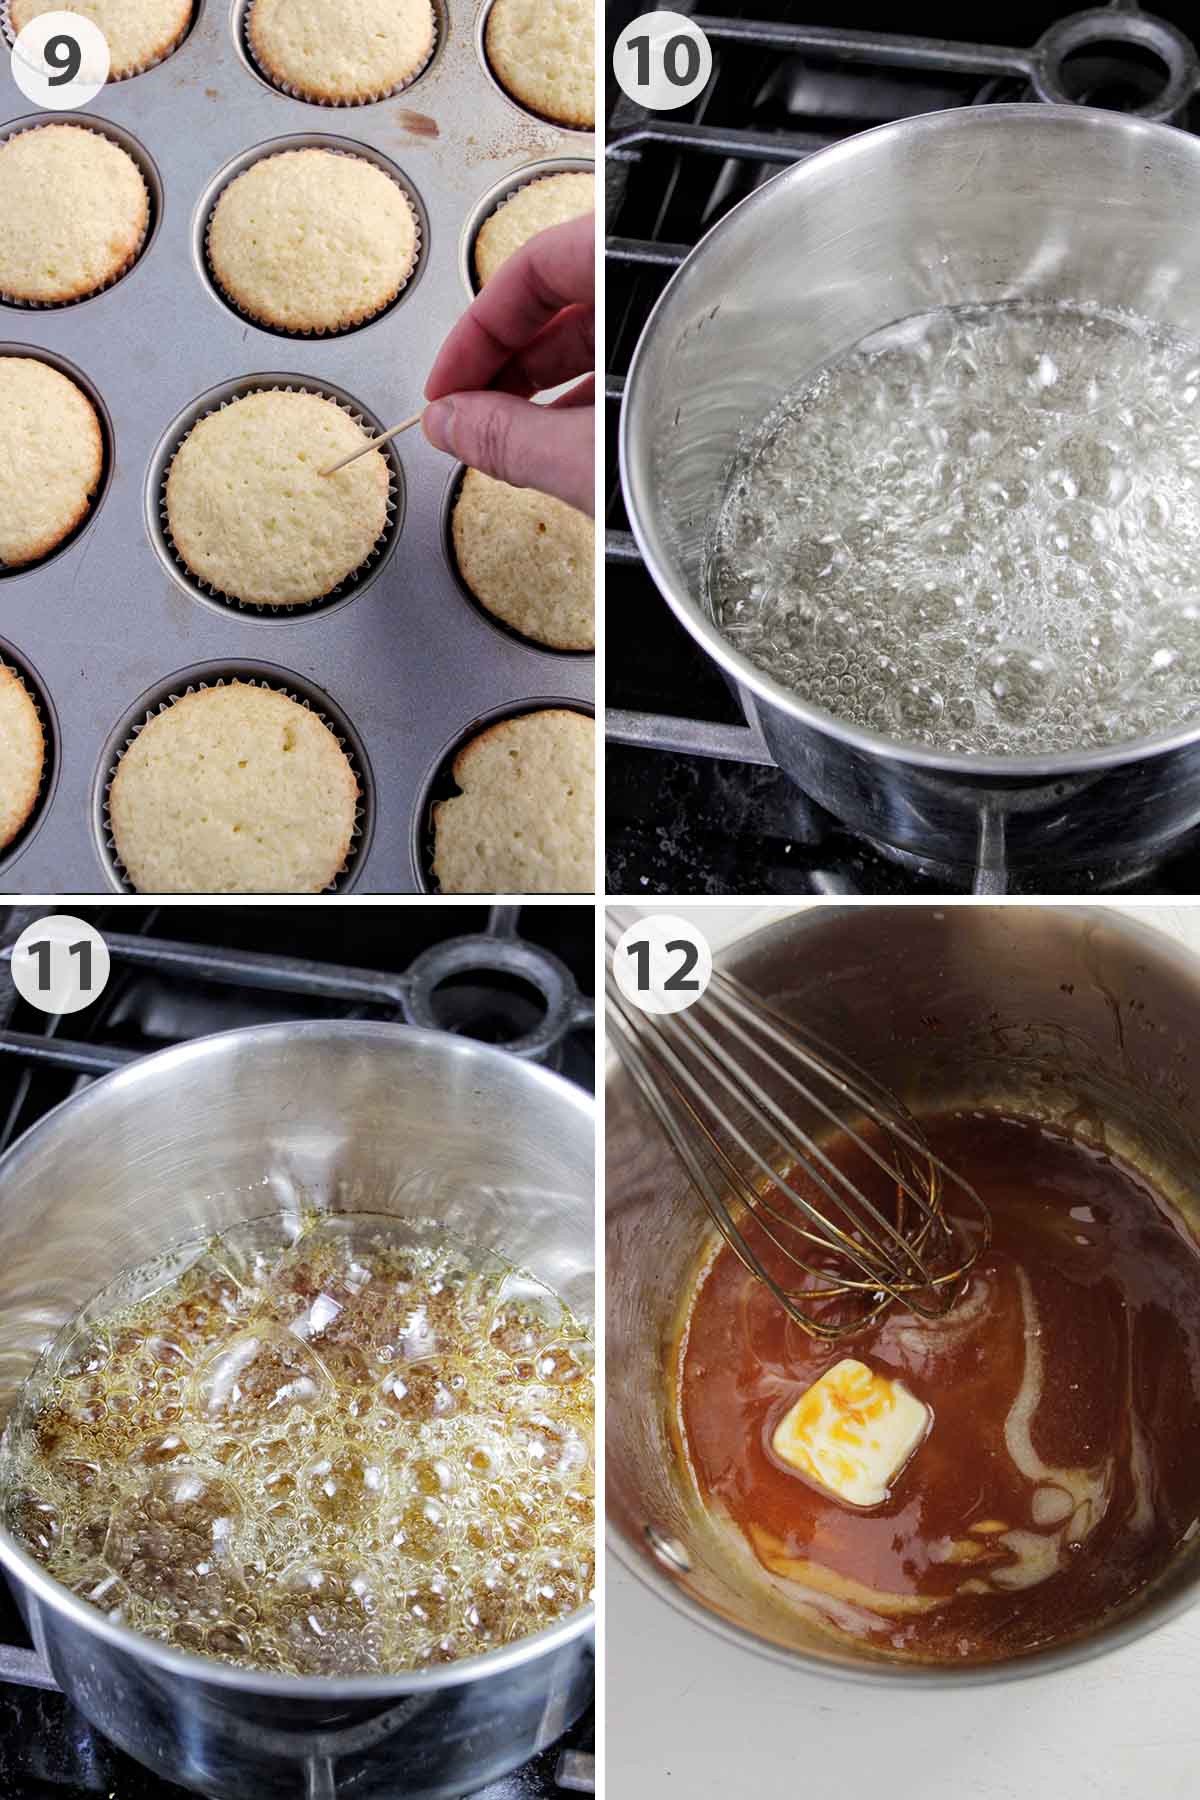 four numbered photos showing how to test doneness on cupcakes and make caramel.